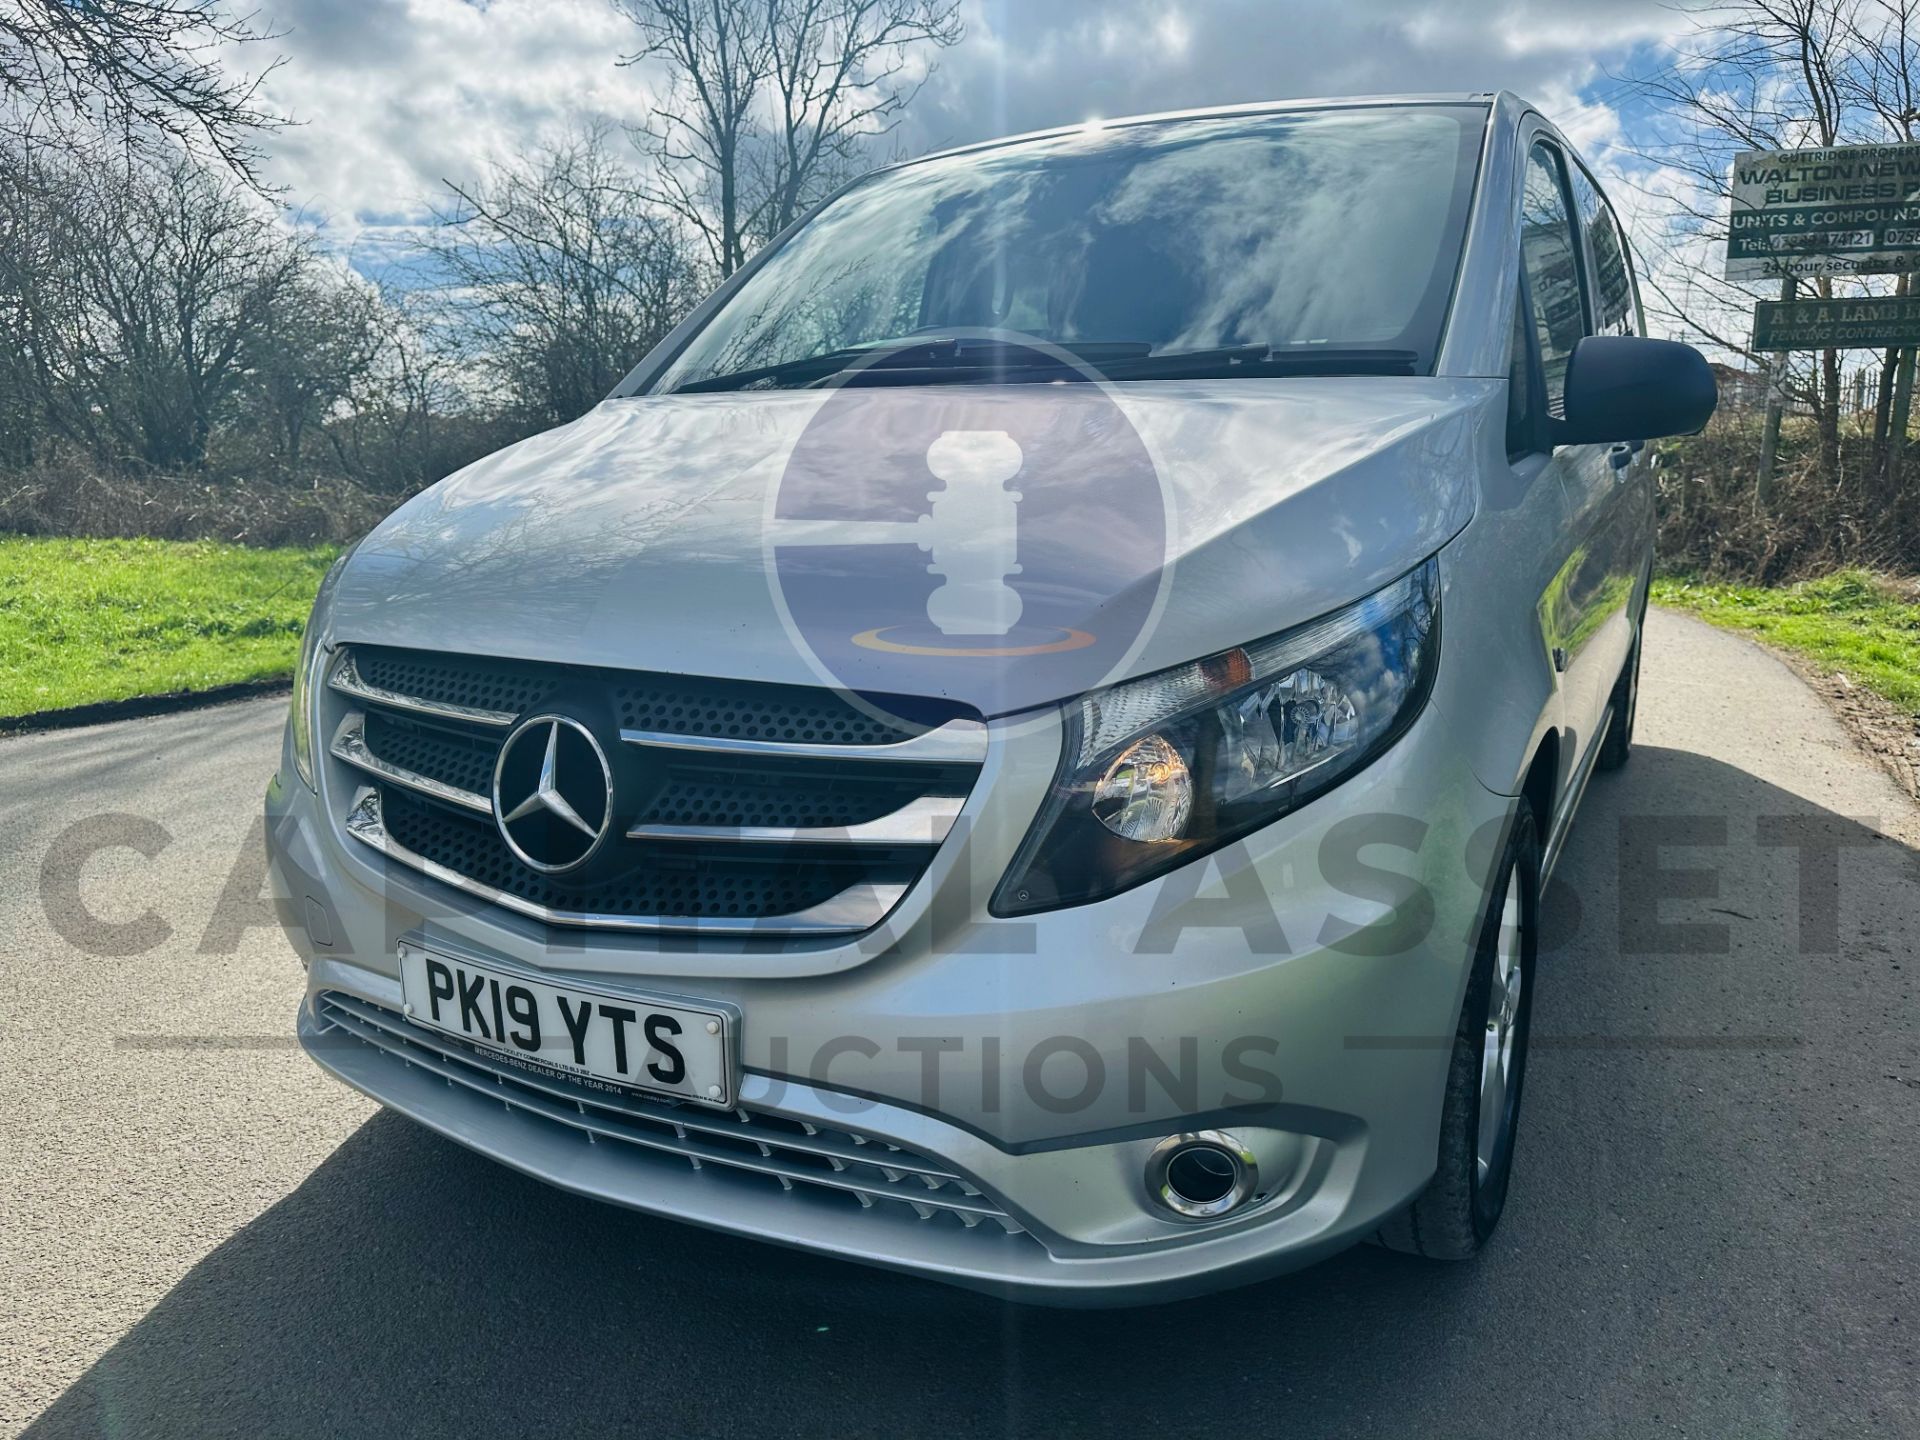 MERCEDES-BENZ VITO 119 CDI *SPORT "LWB DUALINER" 7G AUTOMATIC - 19 REG - ONLY 74K MILES - WOW!!! - Image 5 of 38